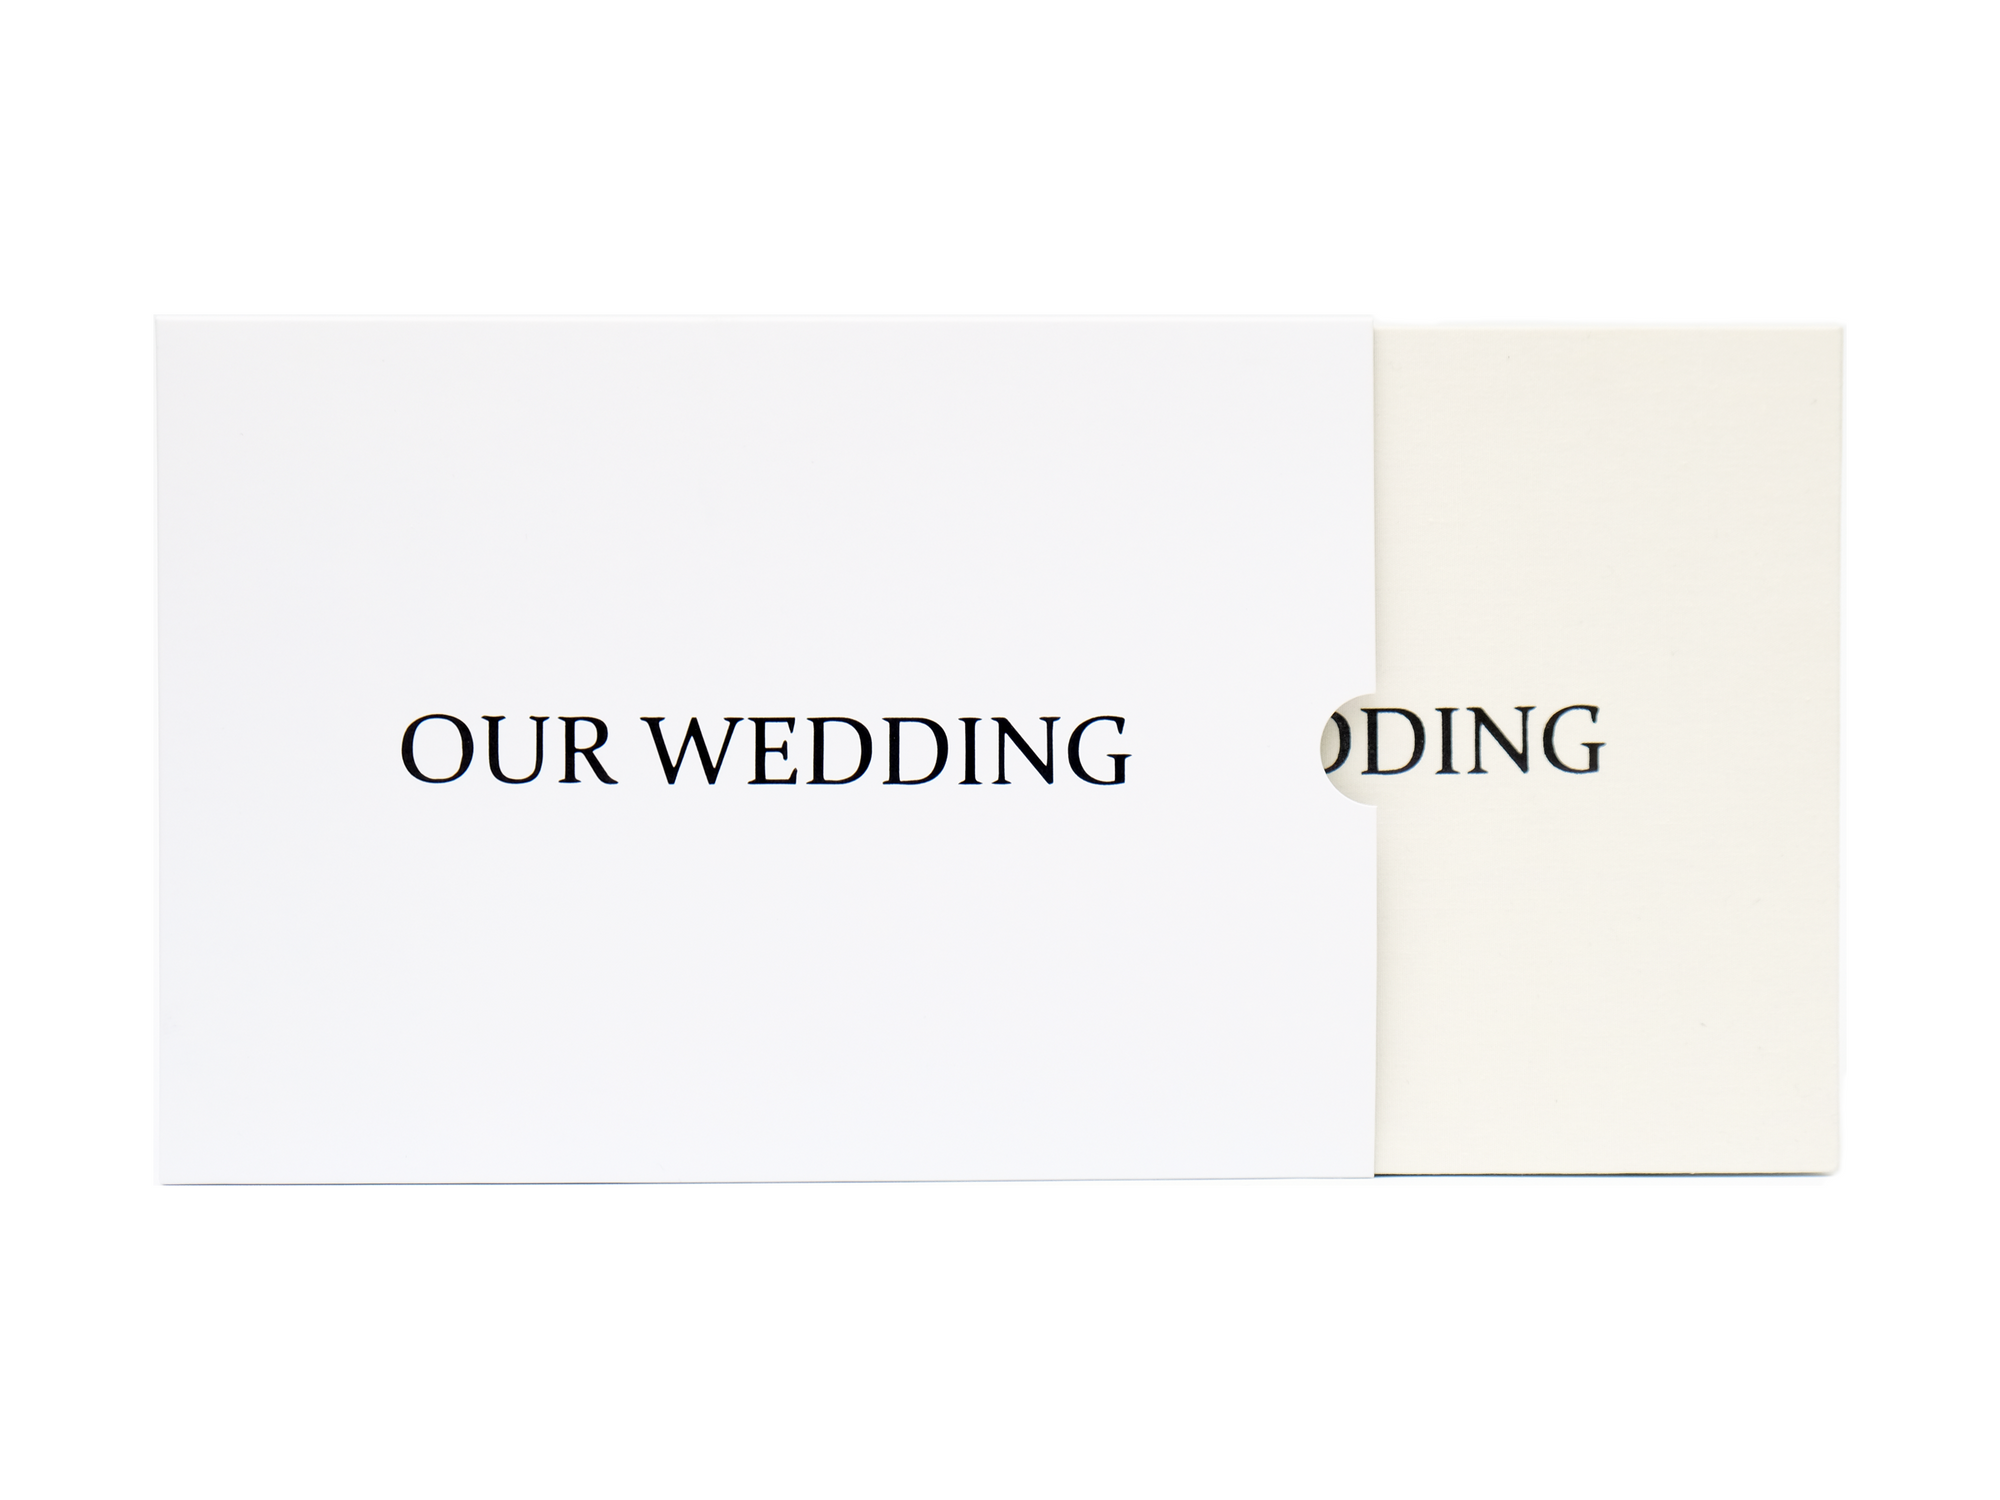 &quot;Our Wedding&quot; Video Book